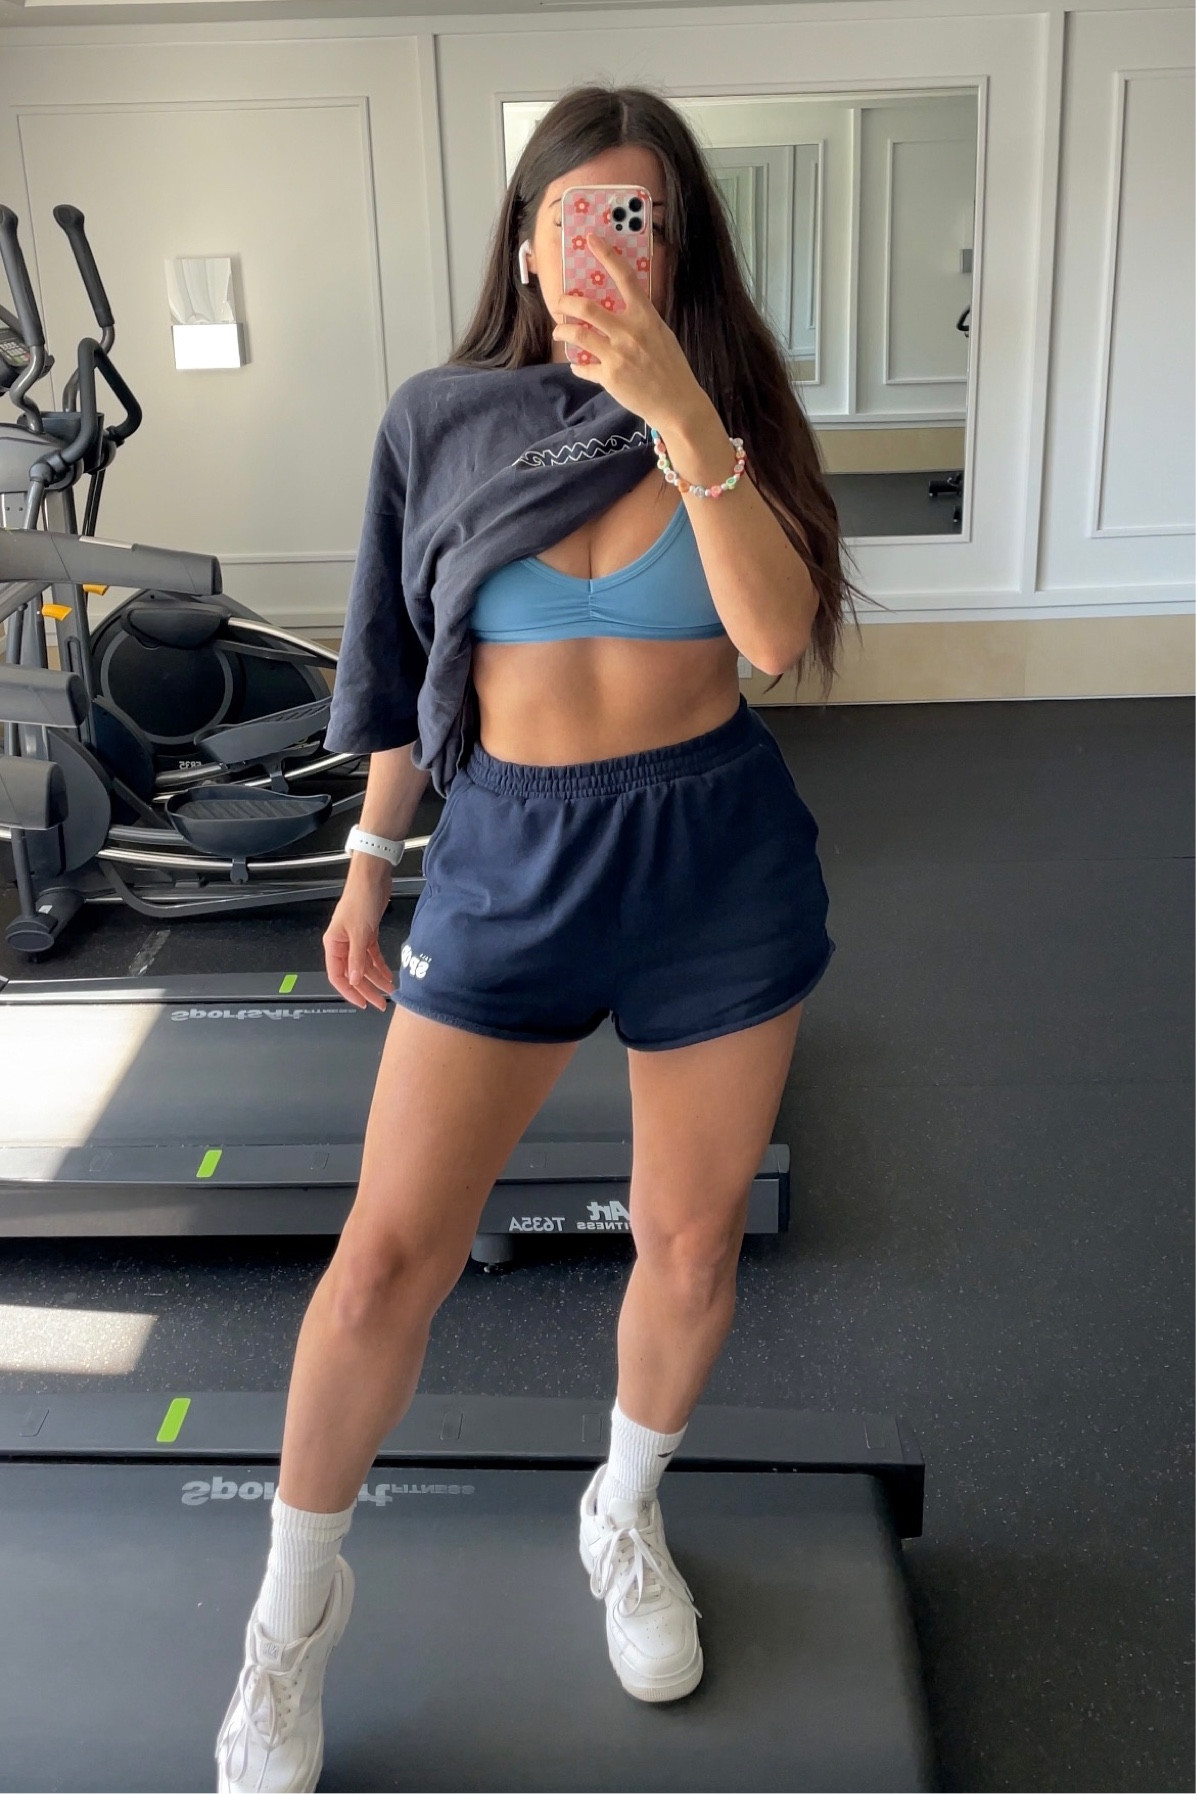 gym girl  Gym outfit, Gym pictures, Workout pics